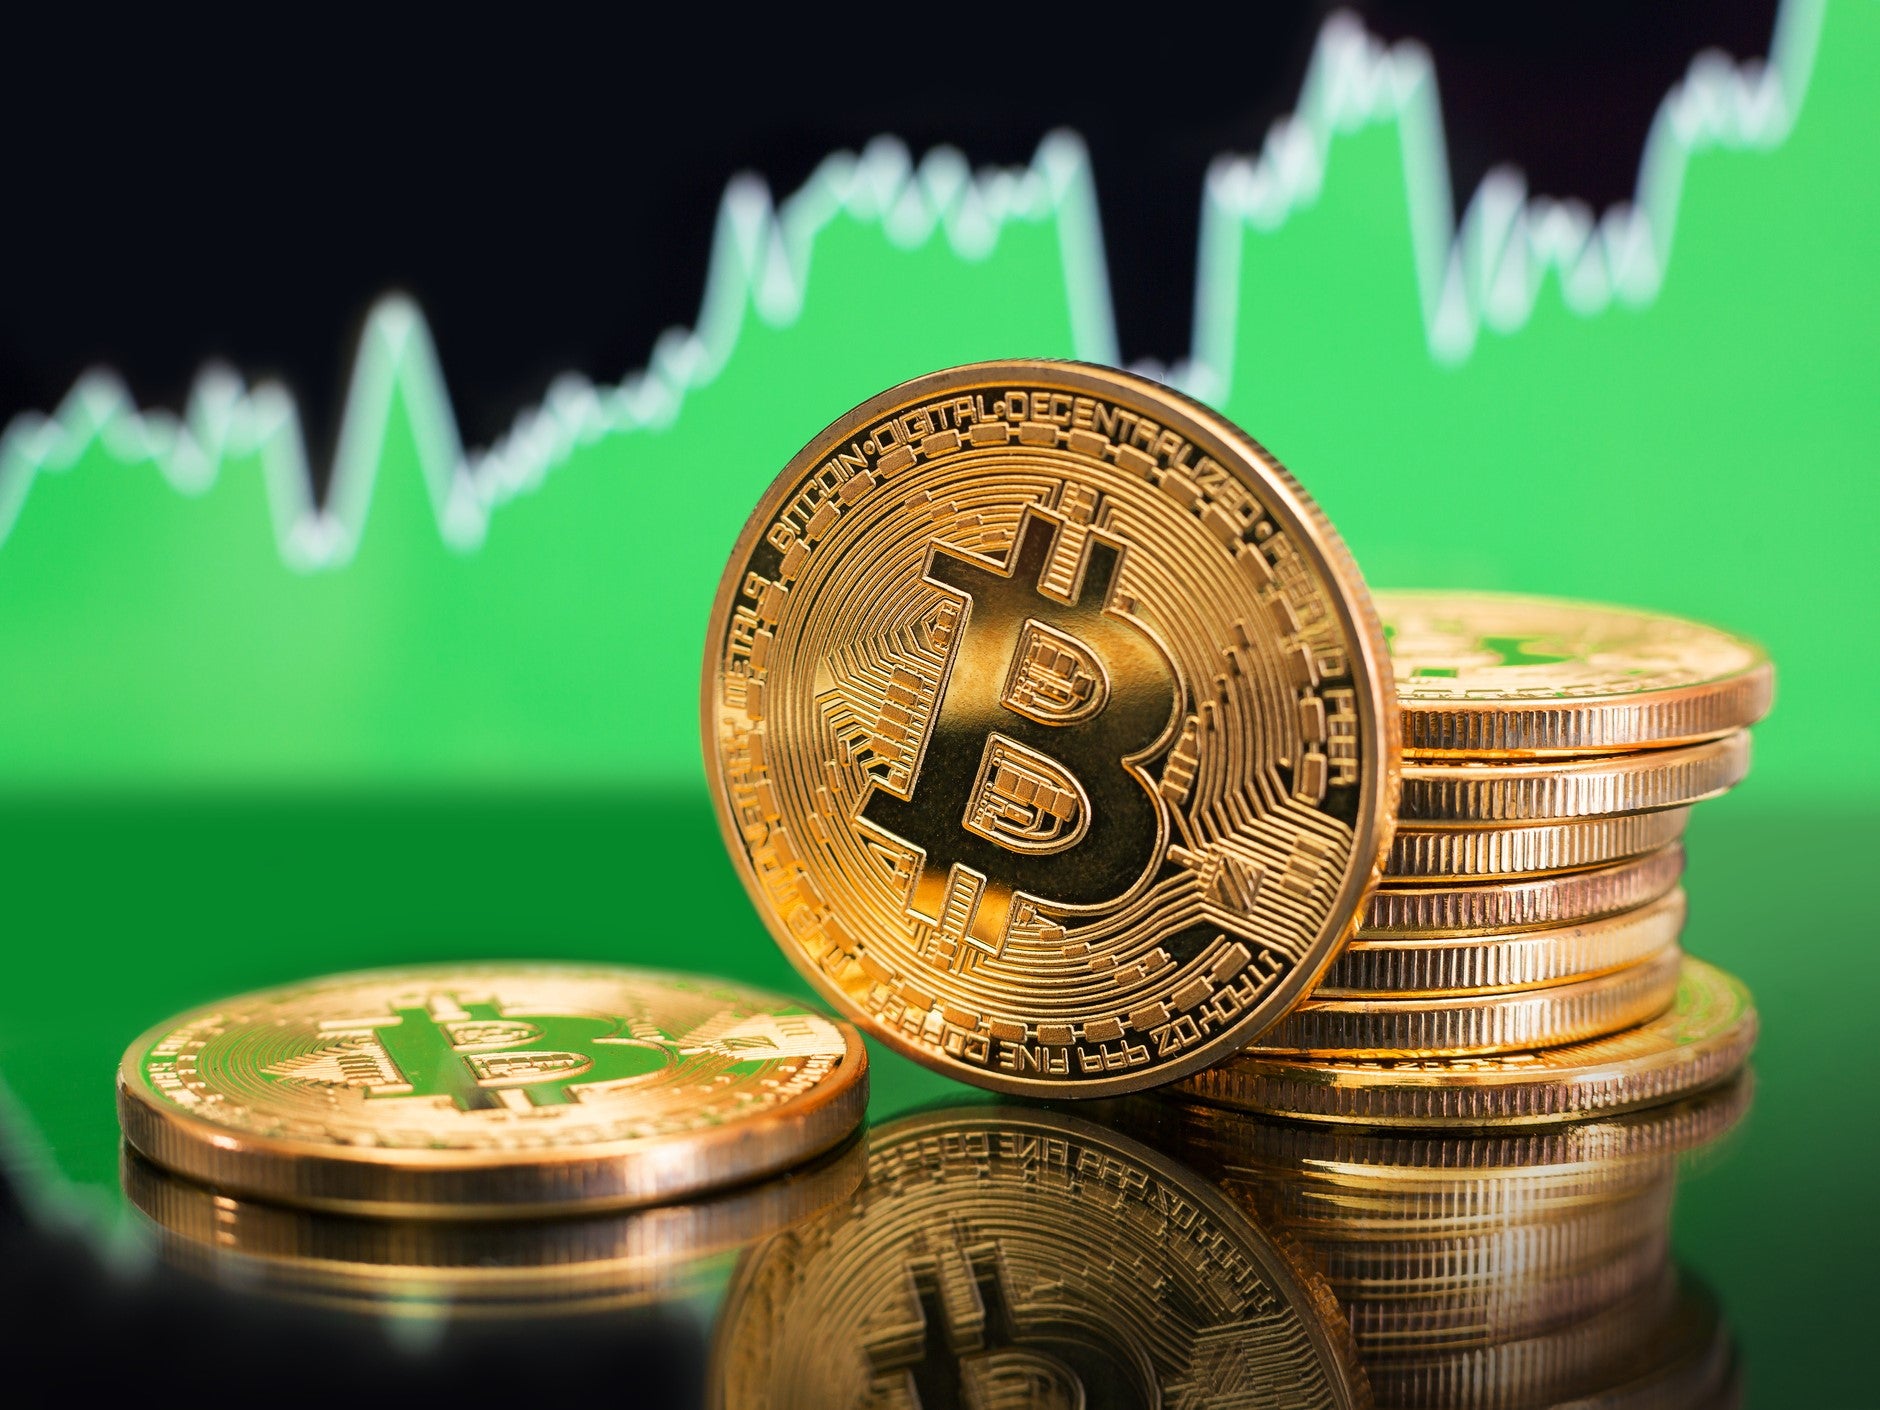 After heavy losses in January, the price of bitcoin has rebounded at the start of February 2022